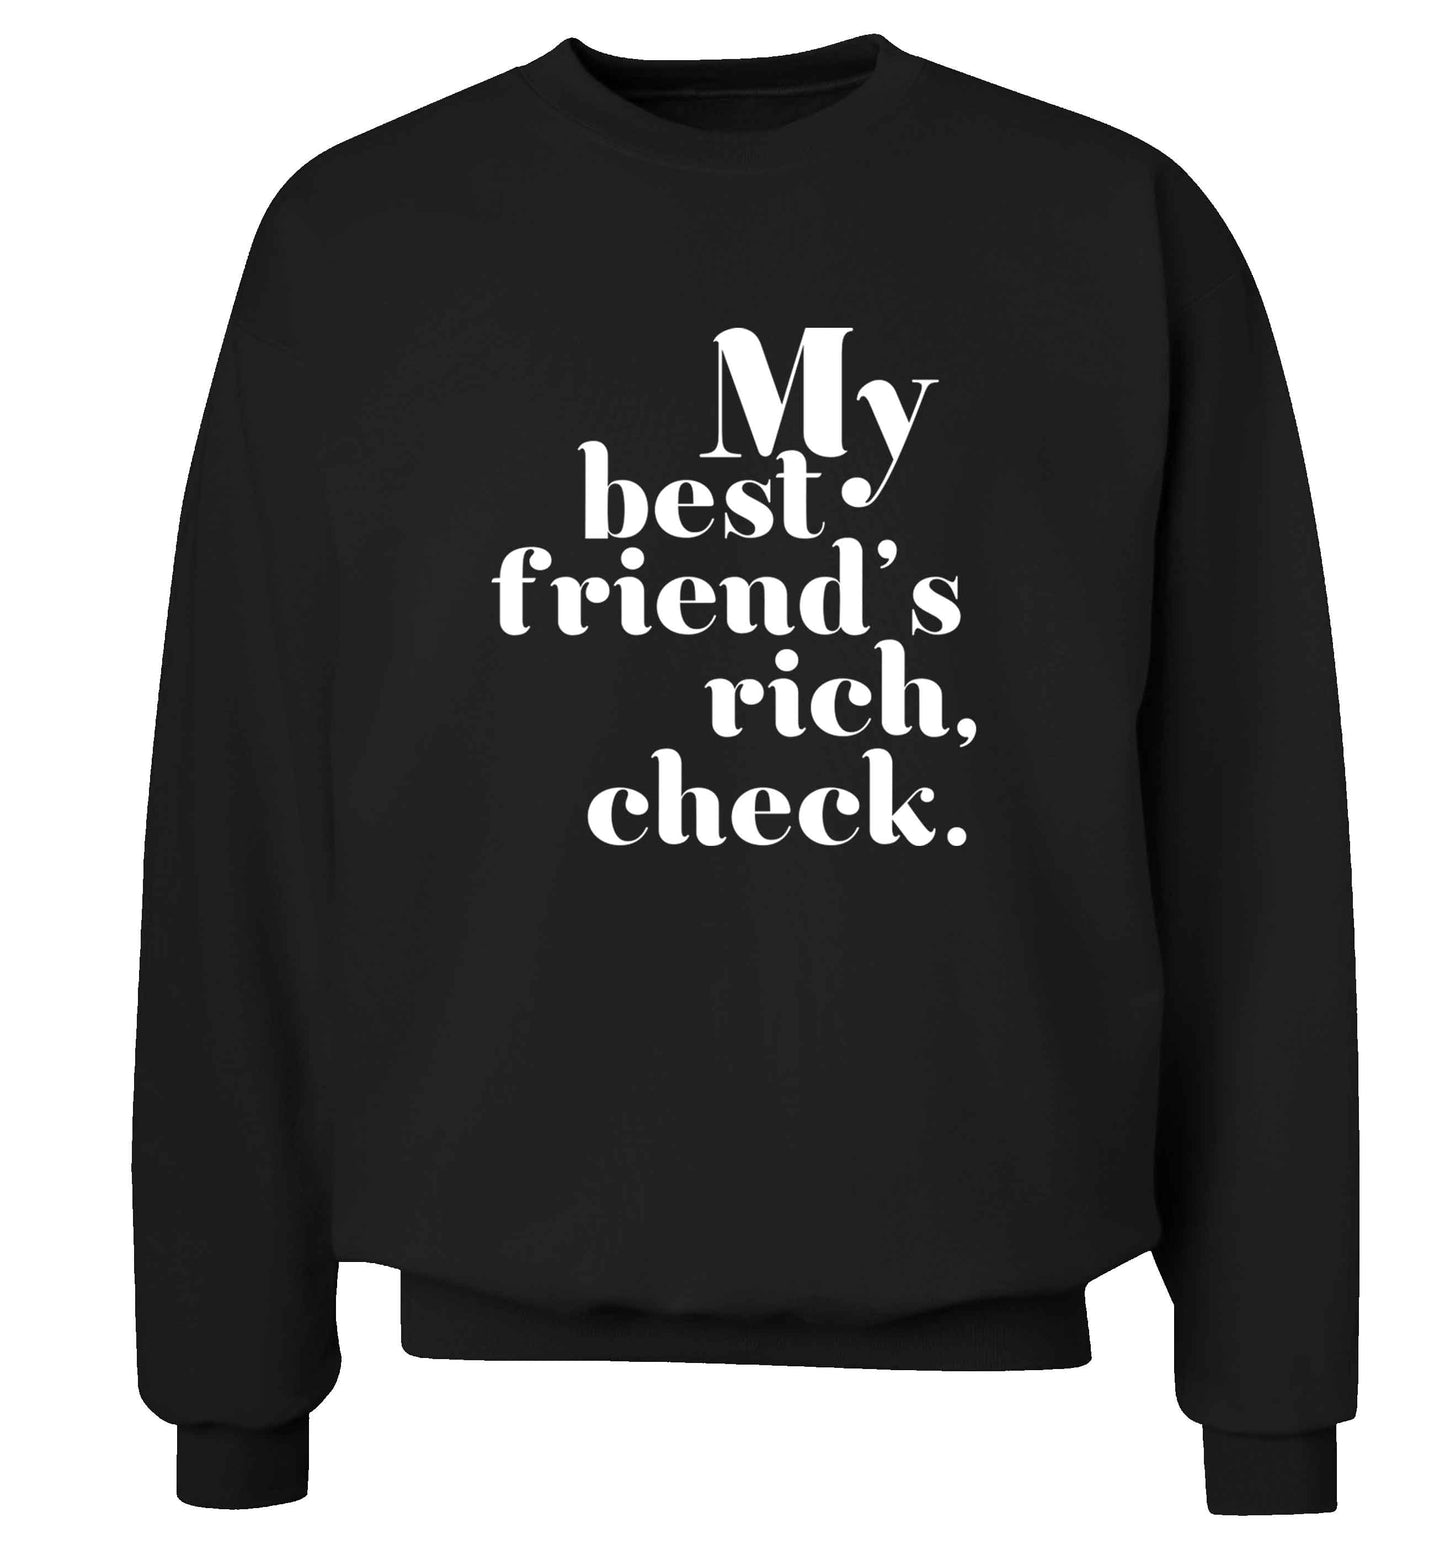 Got a rich best friend? Why not ask them to get you this, just let us  know and we'll tripple the price ;)  adult's unisex black sweater 2XL